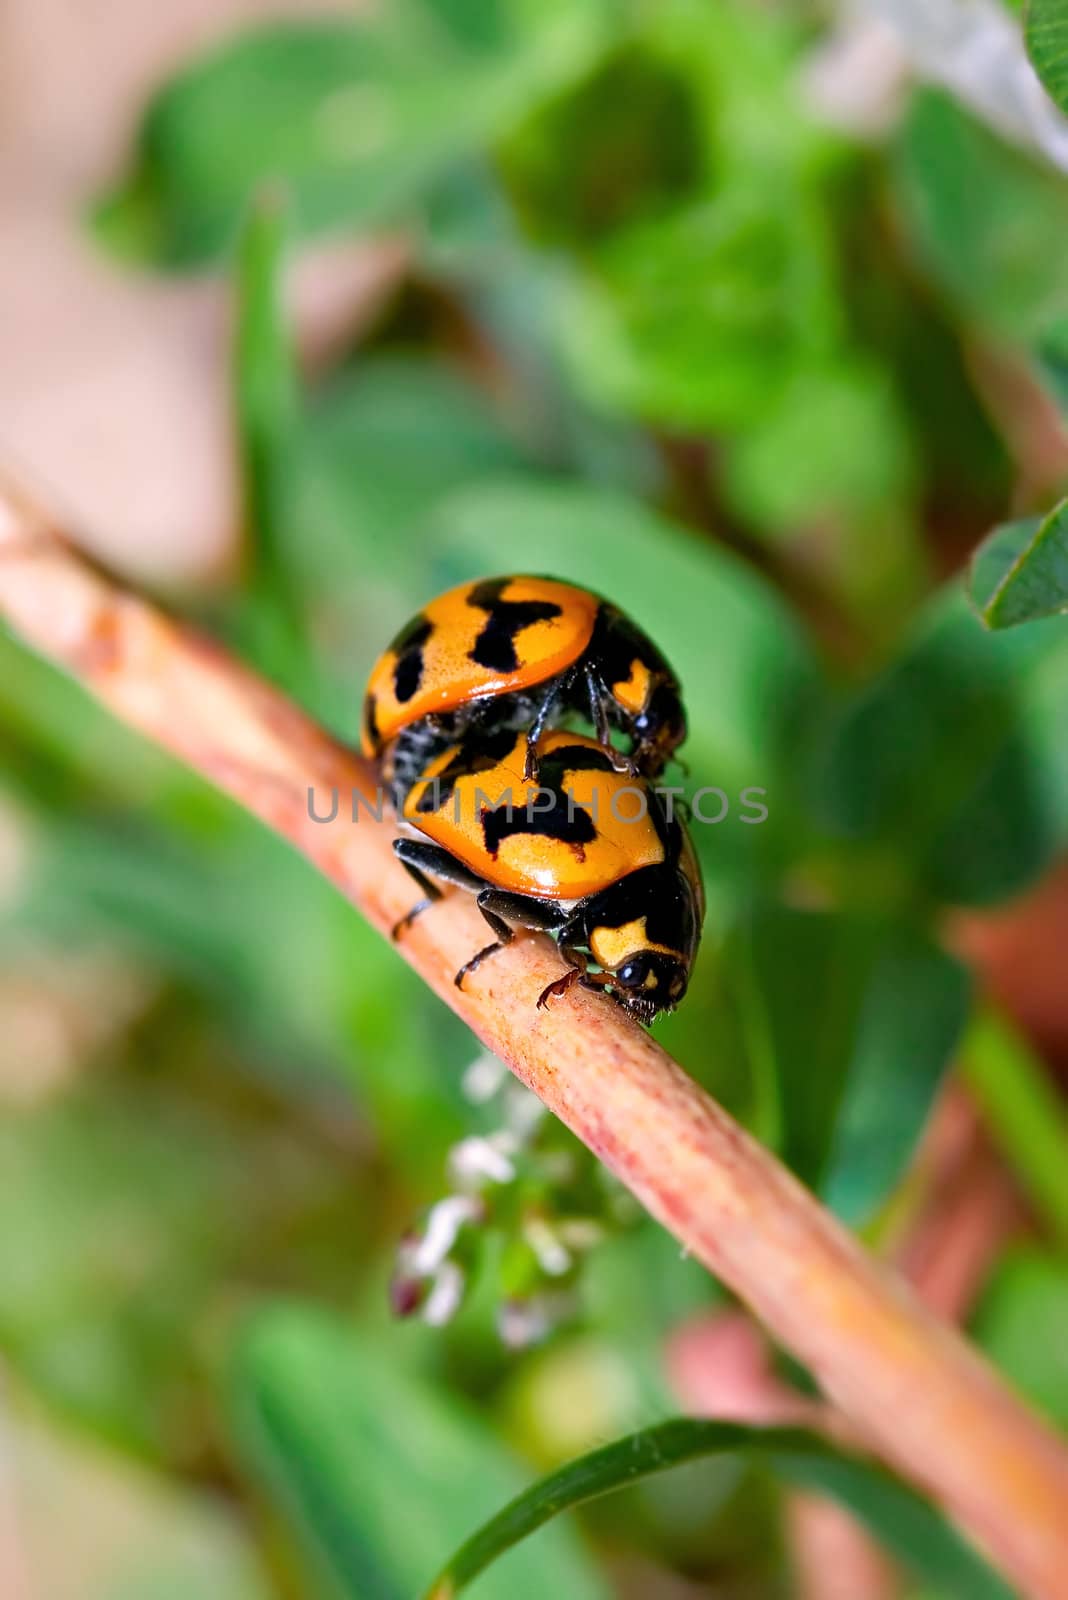 two ladybirds mating on a stick